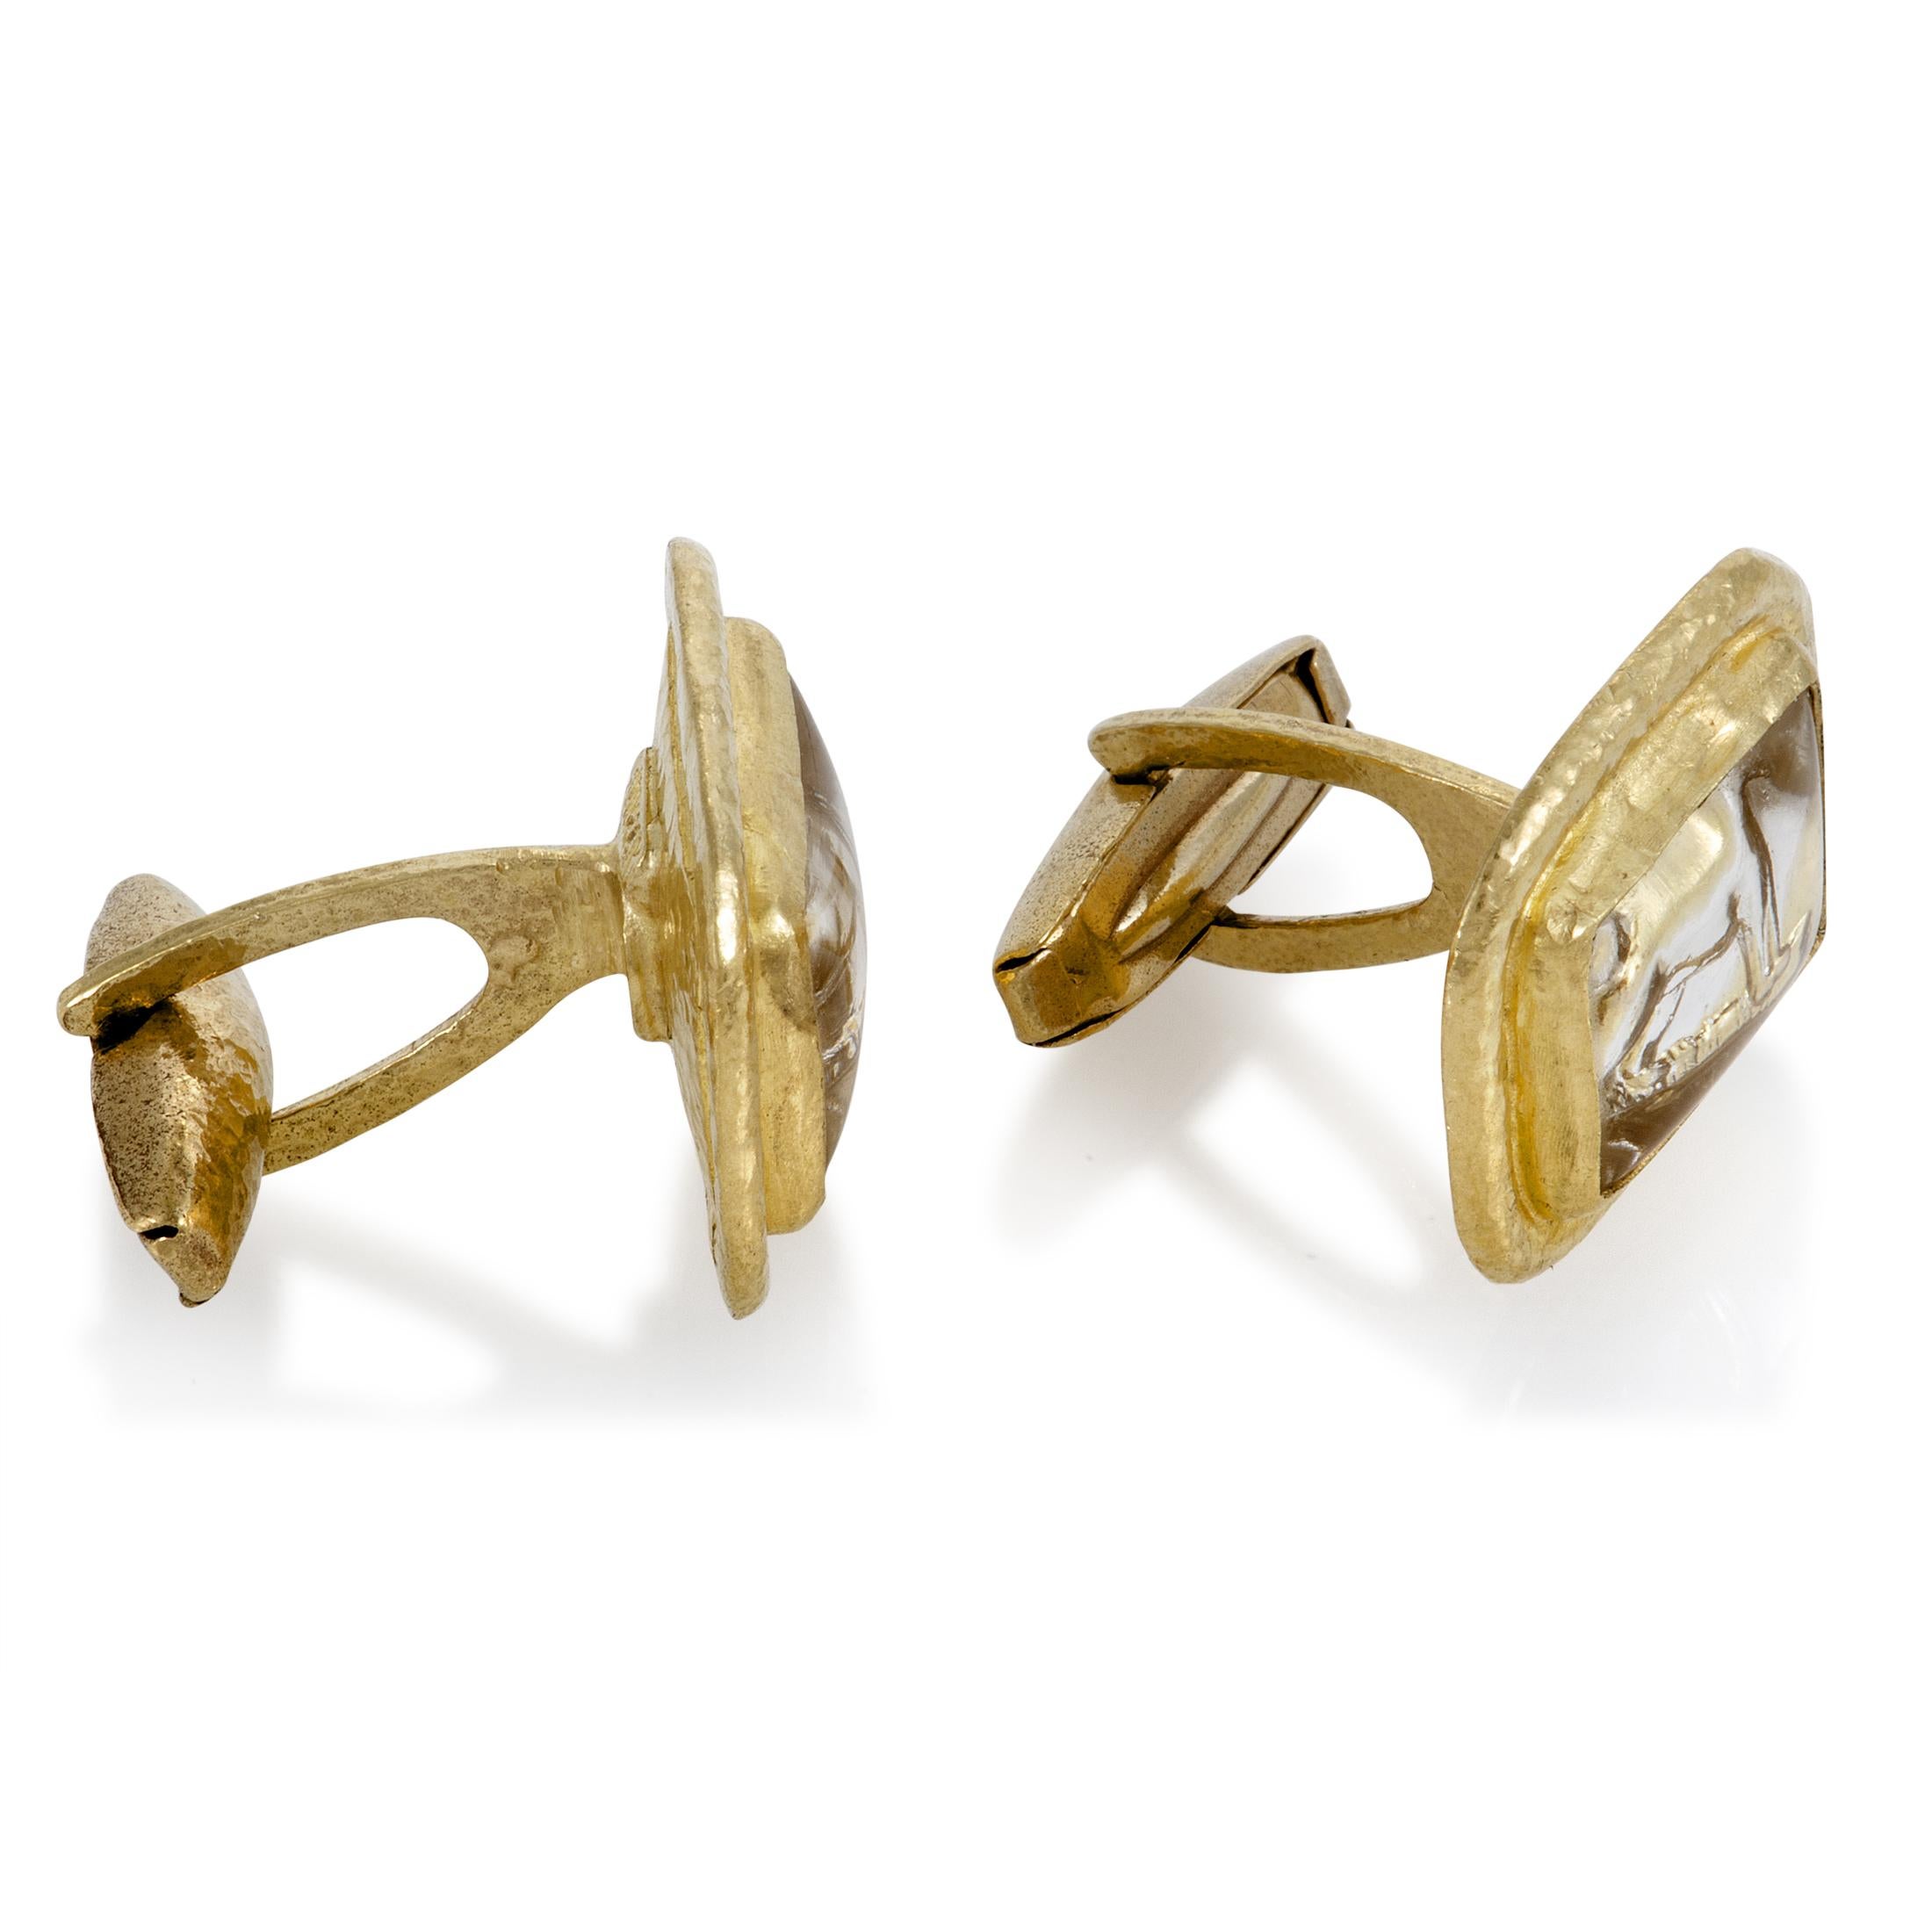 Employing the fascinating traditional decorative technique of intaglio, Gurhan created these fantastic cufflinks which are made of prestigious 24K yellow gold and set with rock crystals that boast compelling dog motifs.
